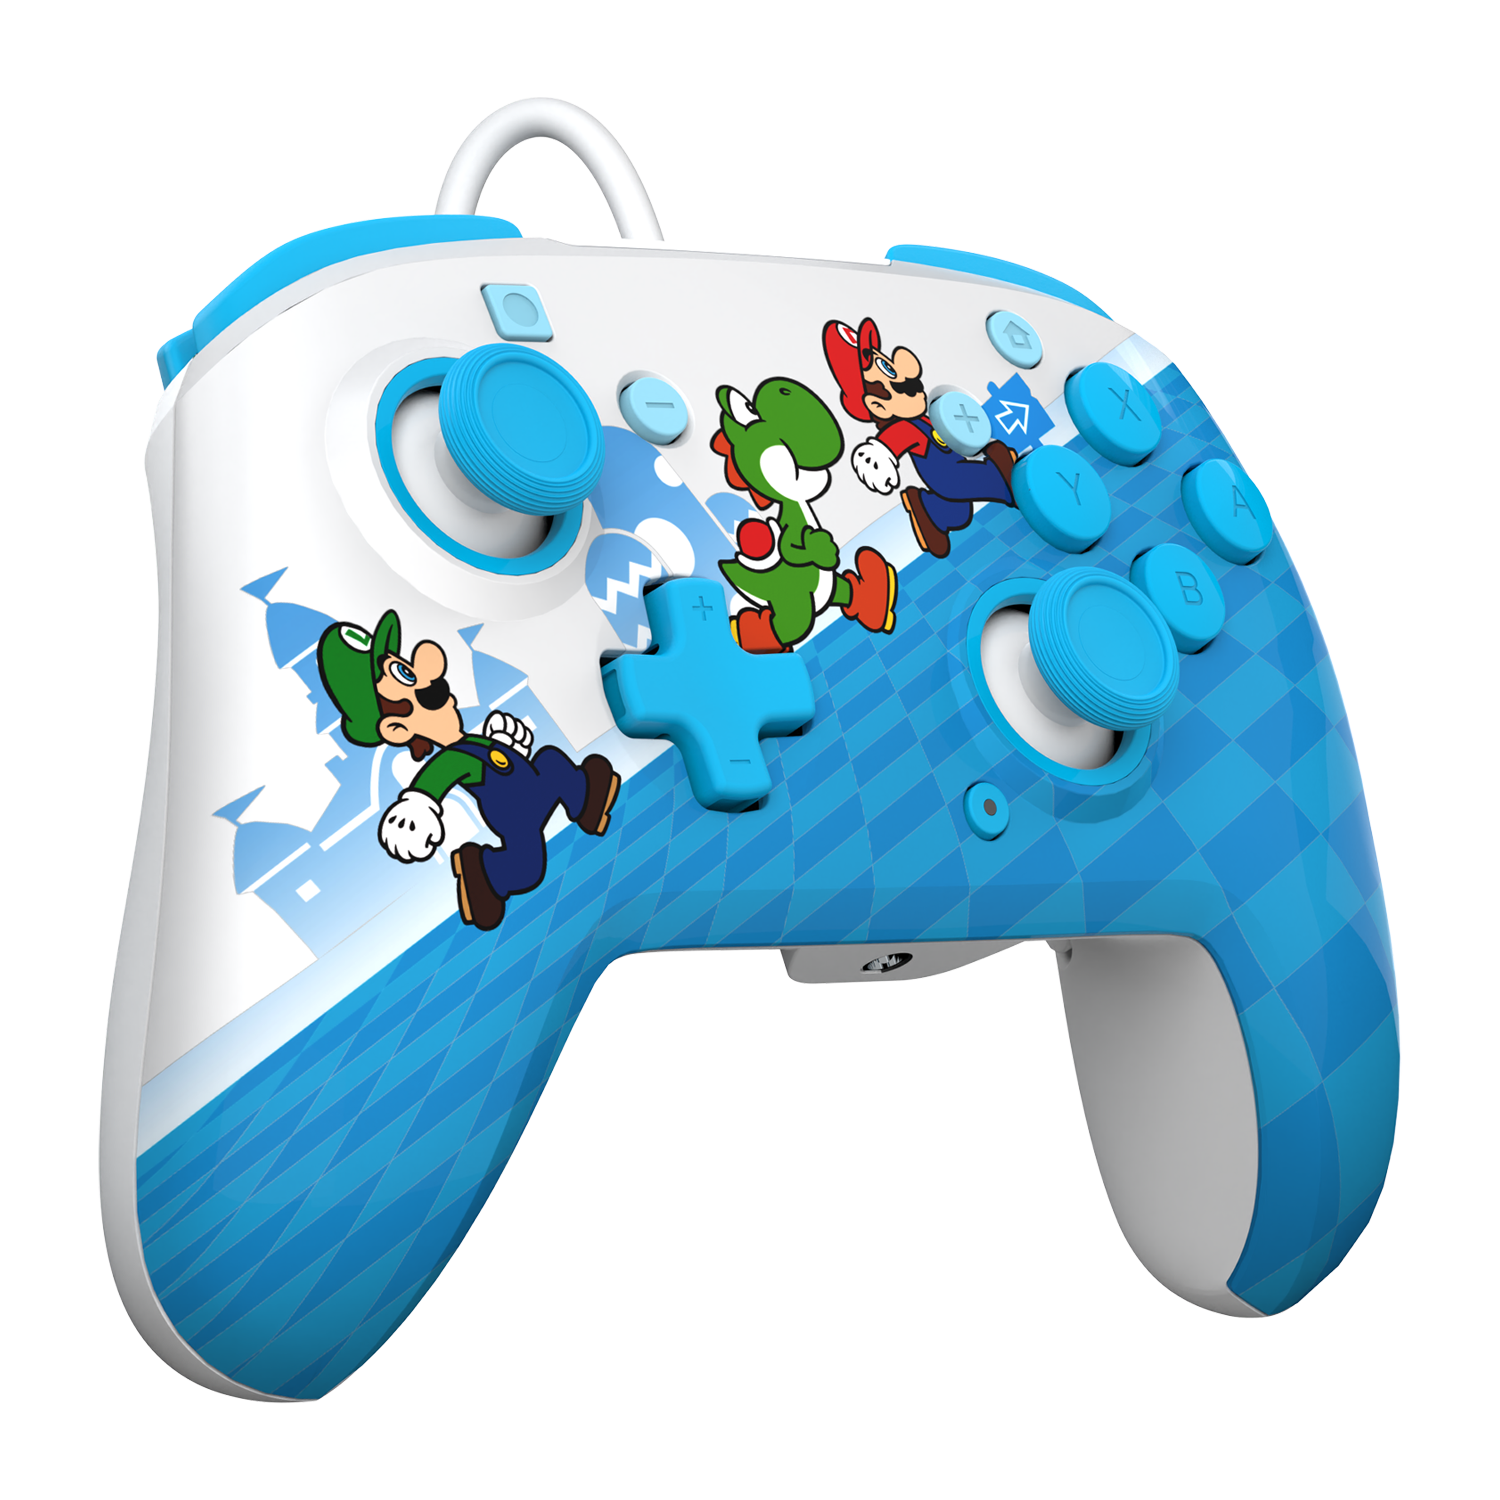 The Cat Mario Controller Support/ Games Controller / Mobile 